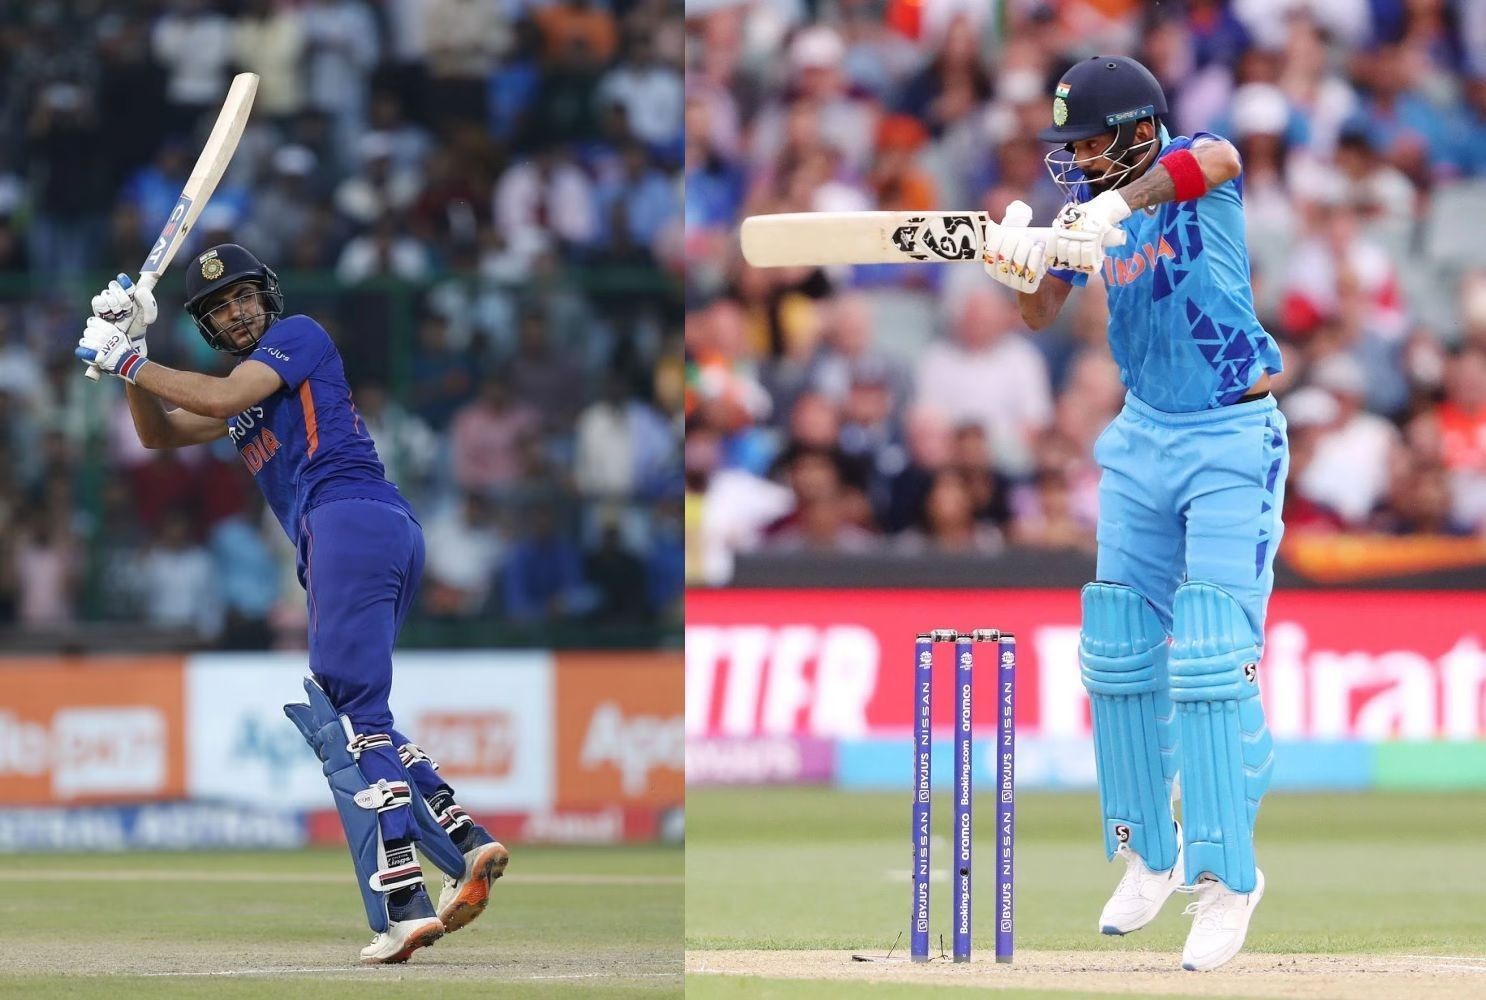 Shubman Gill (left) and KL Rahul played the first two ODIs against Sri Lanka. [P/C: Getty]